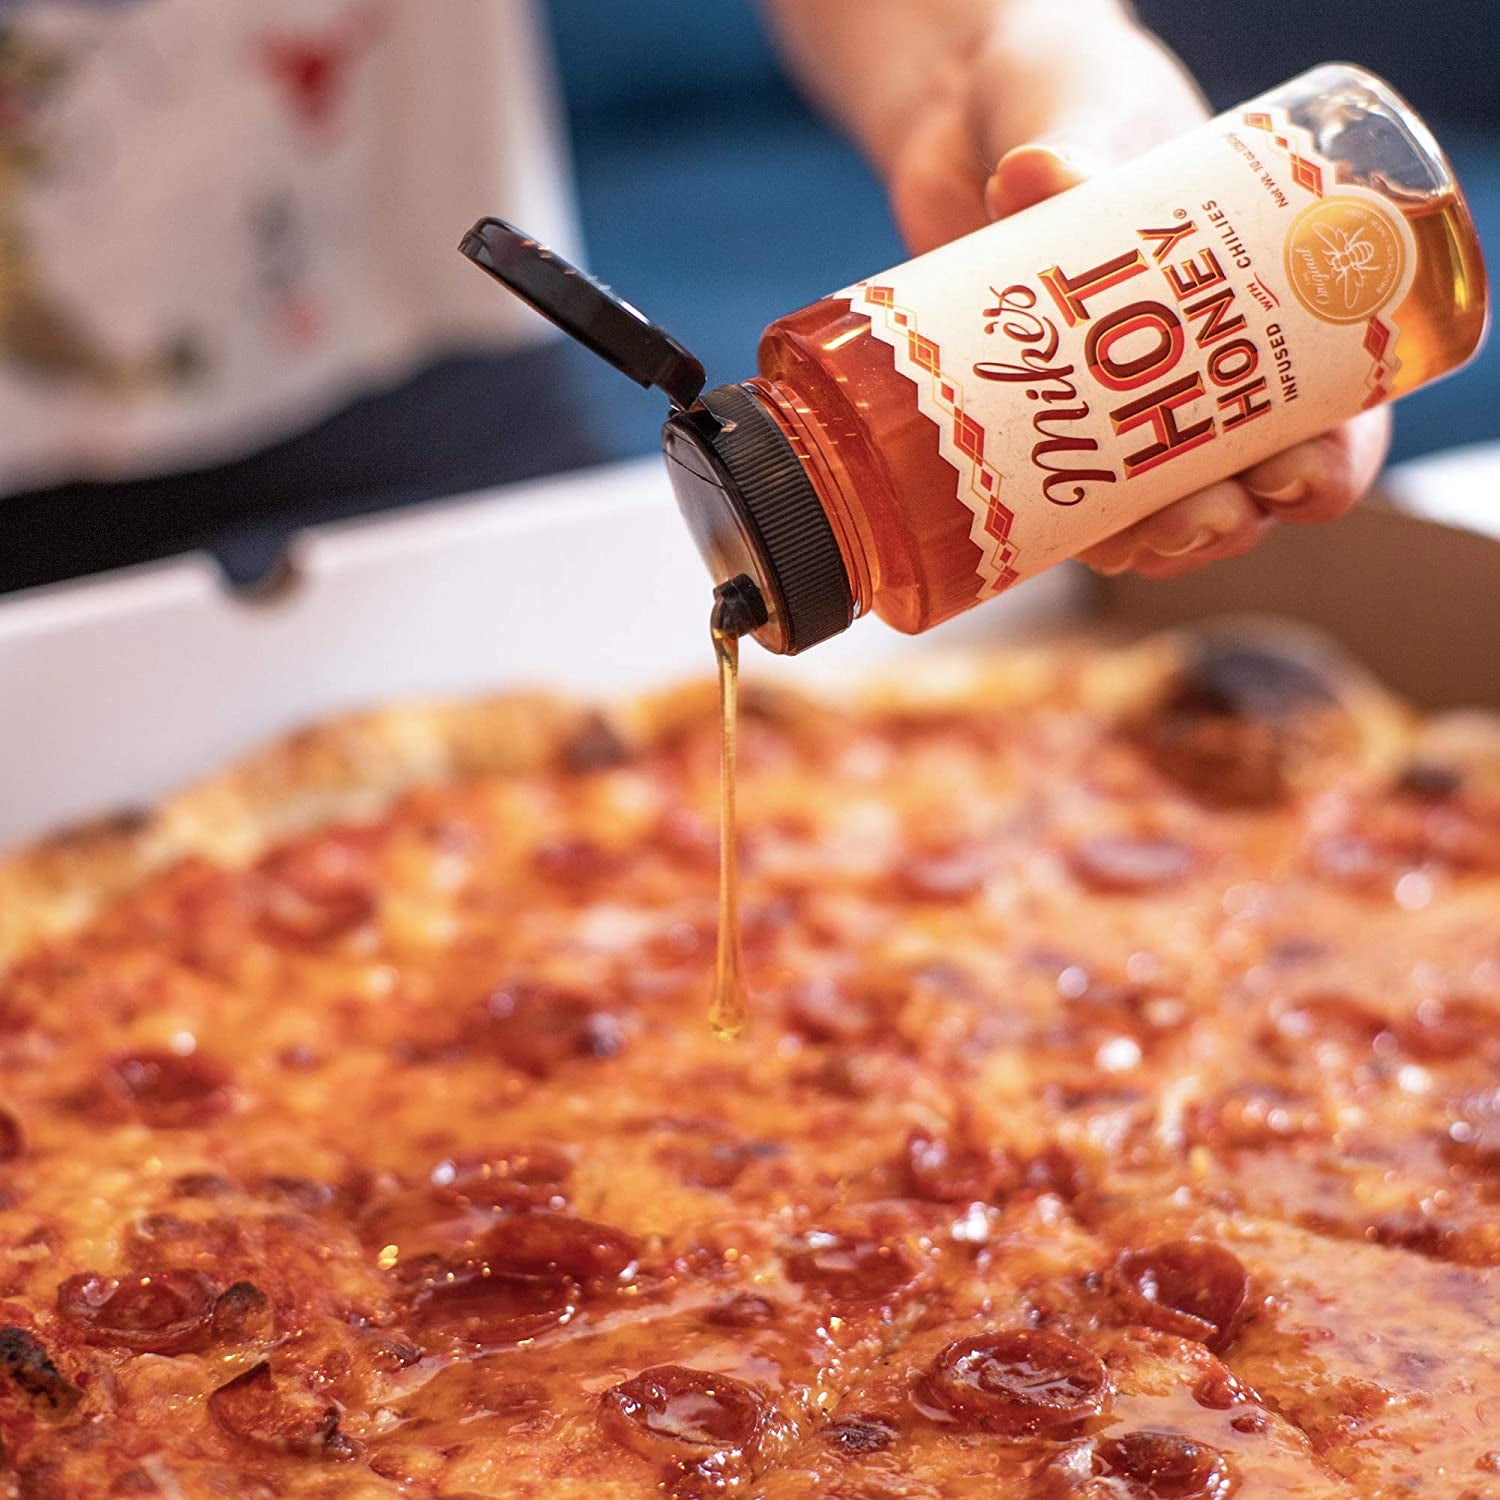 The honey being poured over pizza